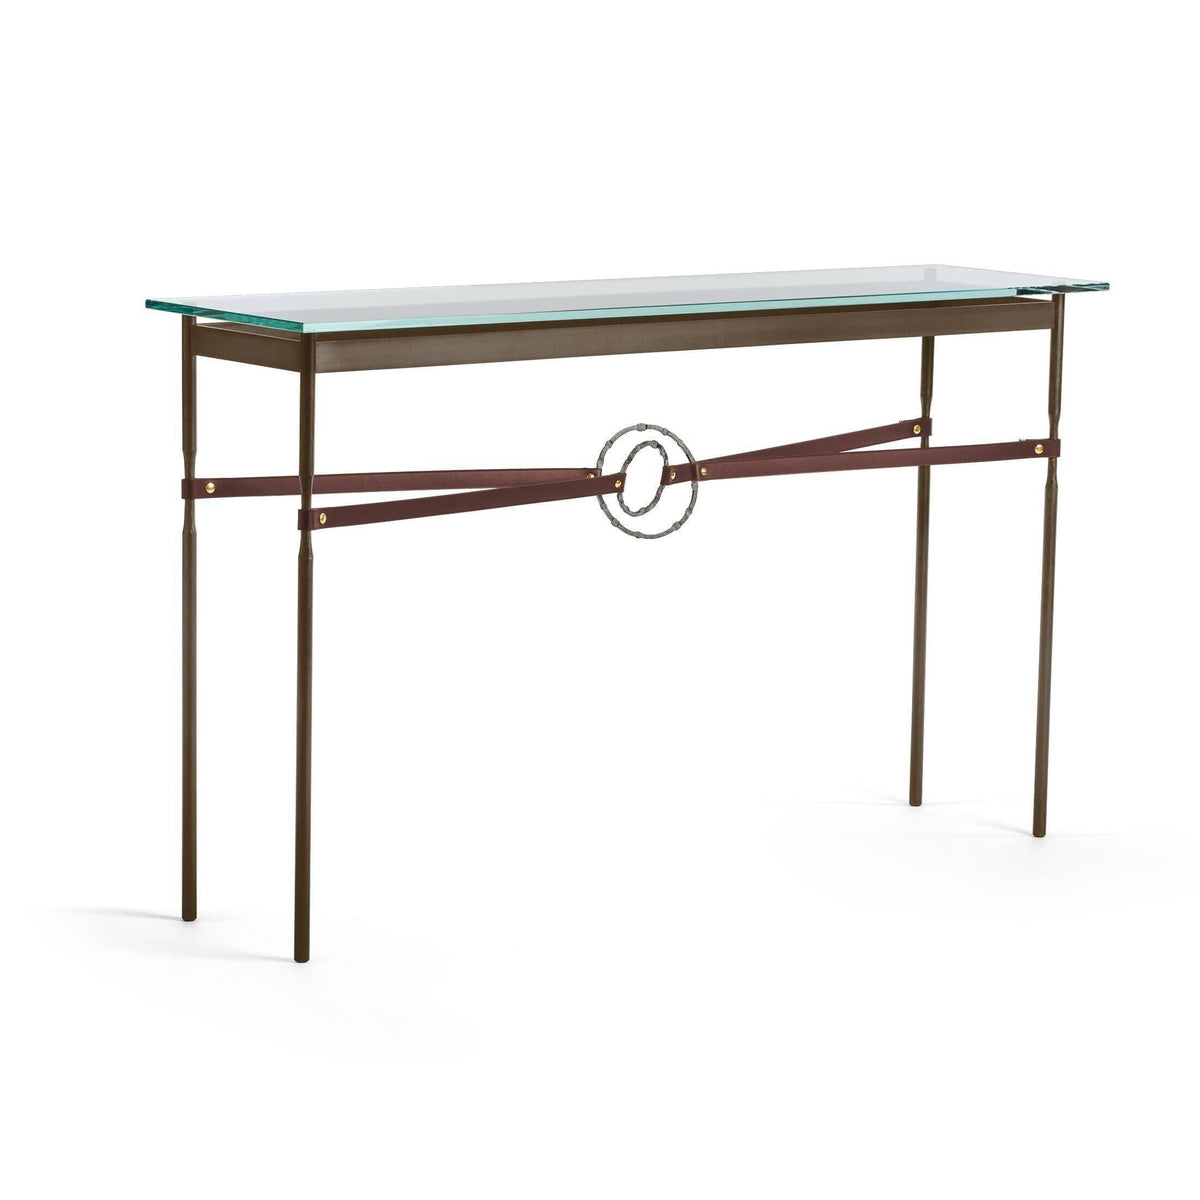 Hubbardton Forge - Equus Brown Leather Console Table - 750118-05-20-LB-VA0714 | Montreal Lighting & Hardware